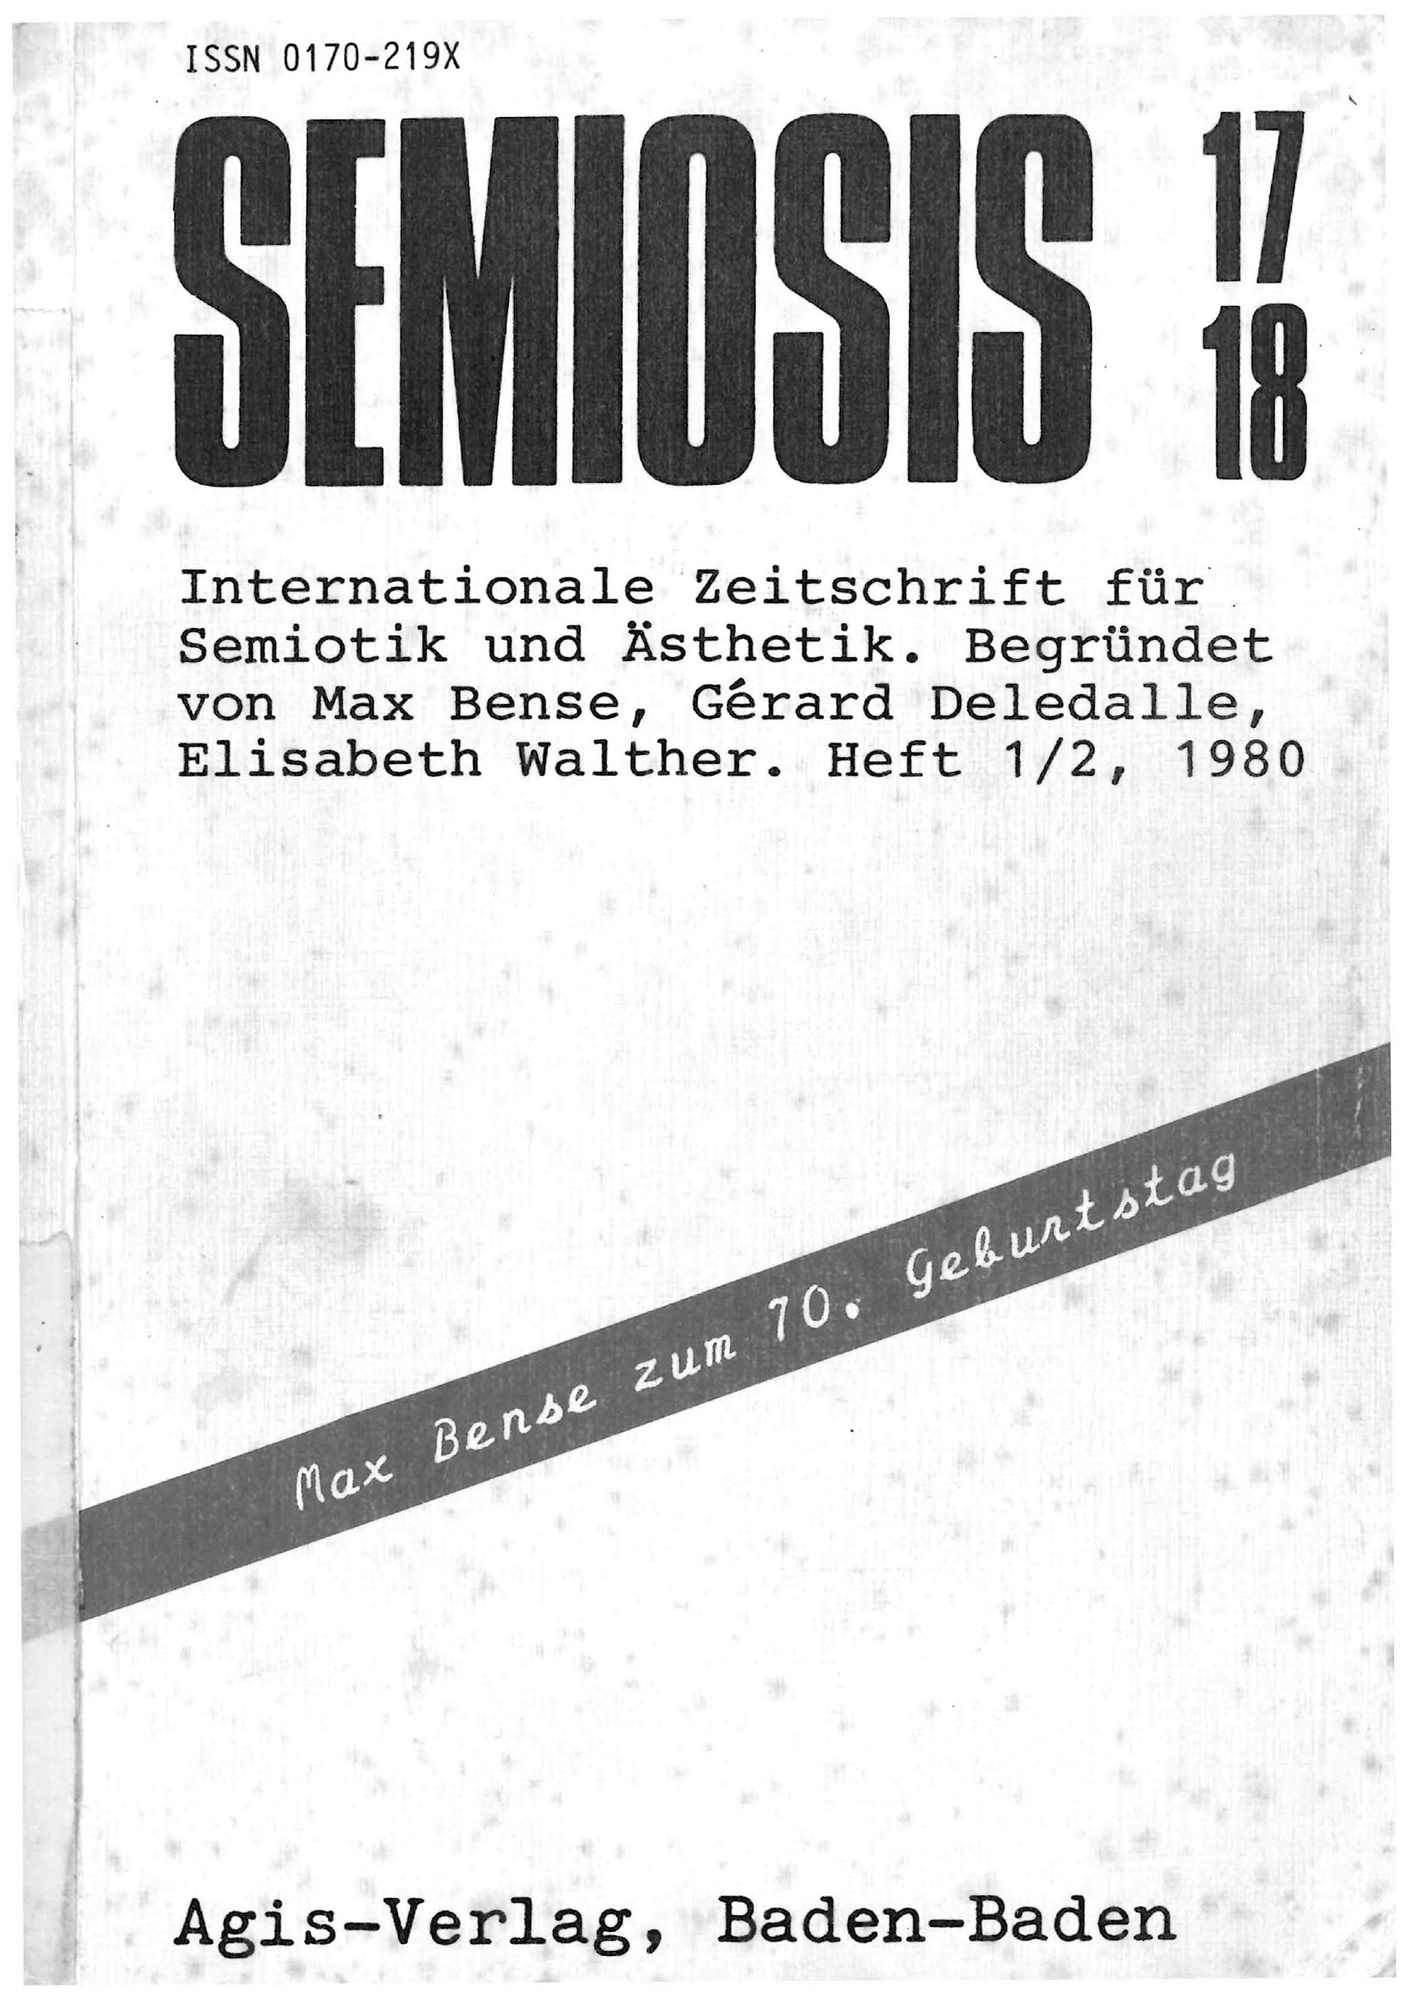 Cover of the magazine "semiosis": black text on white background